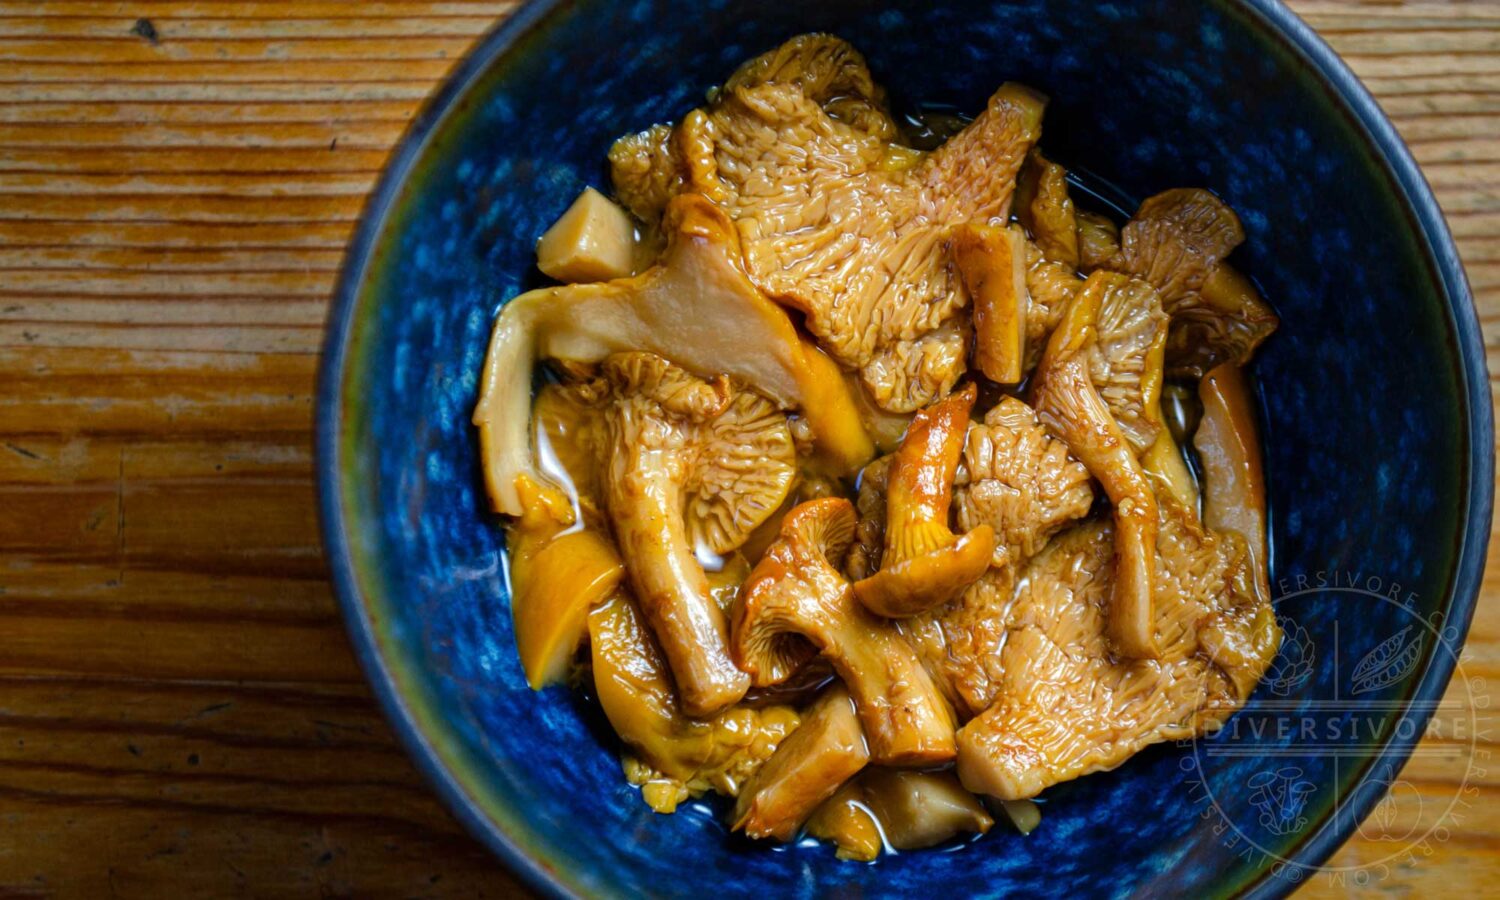 Pickled chanterelle mushrooms in a blue bowl